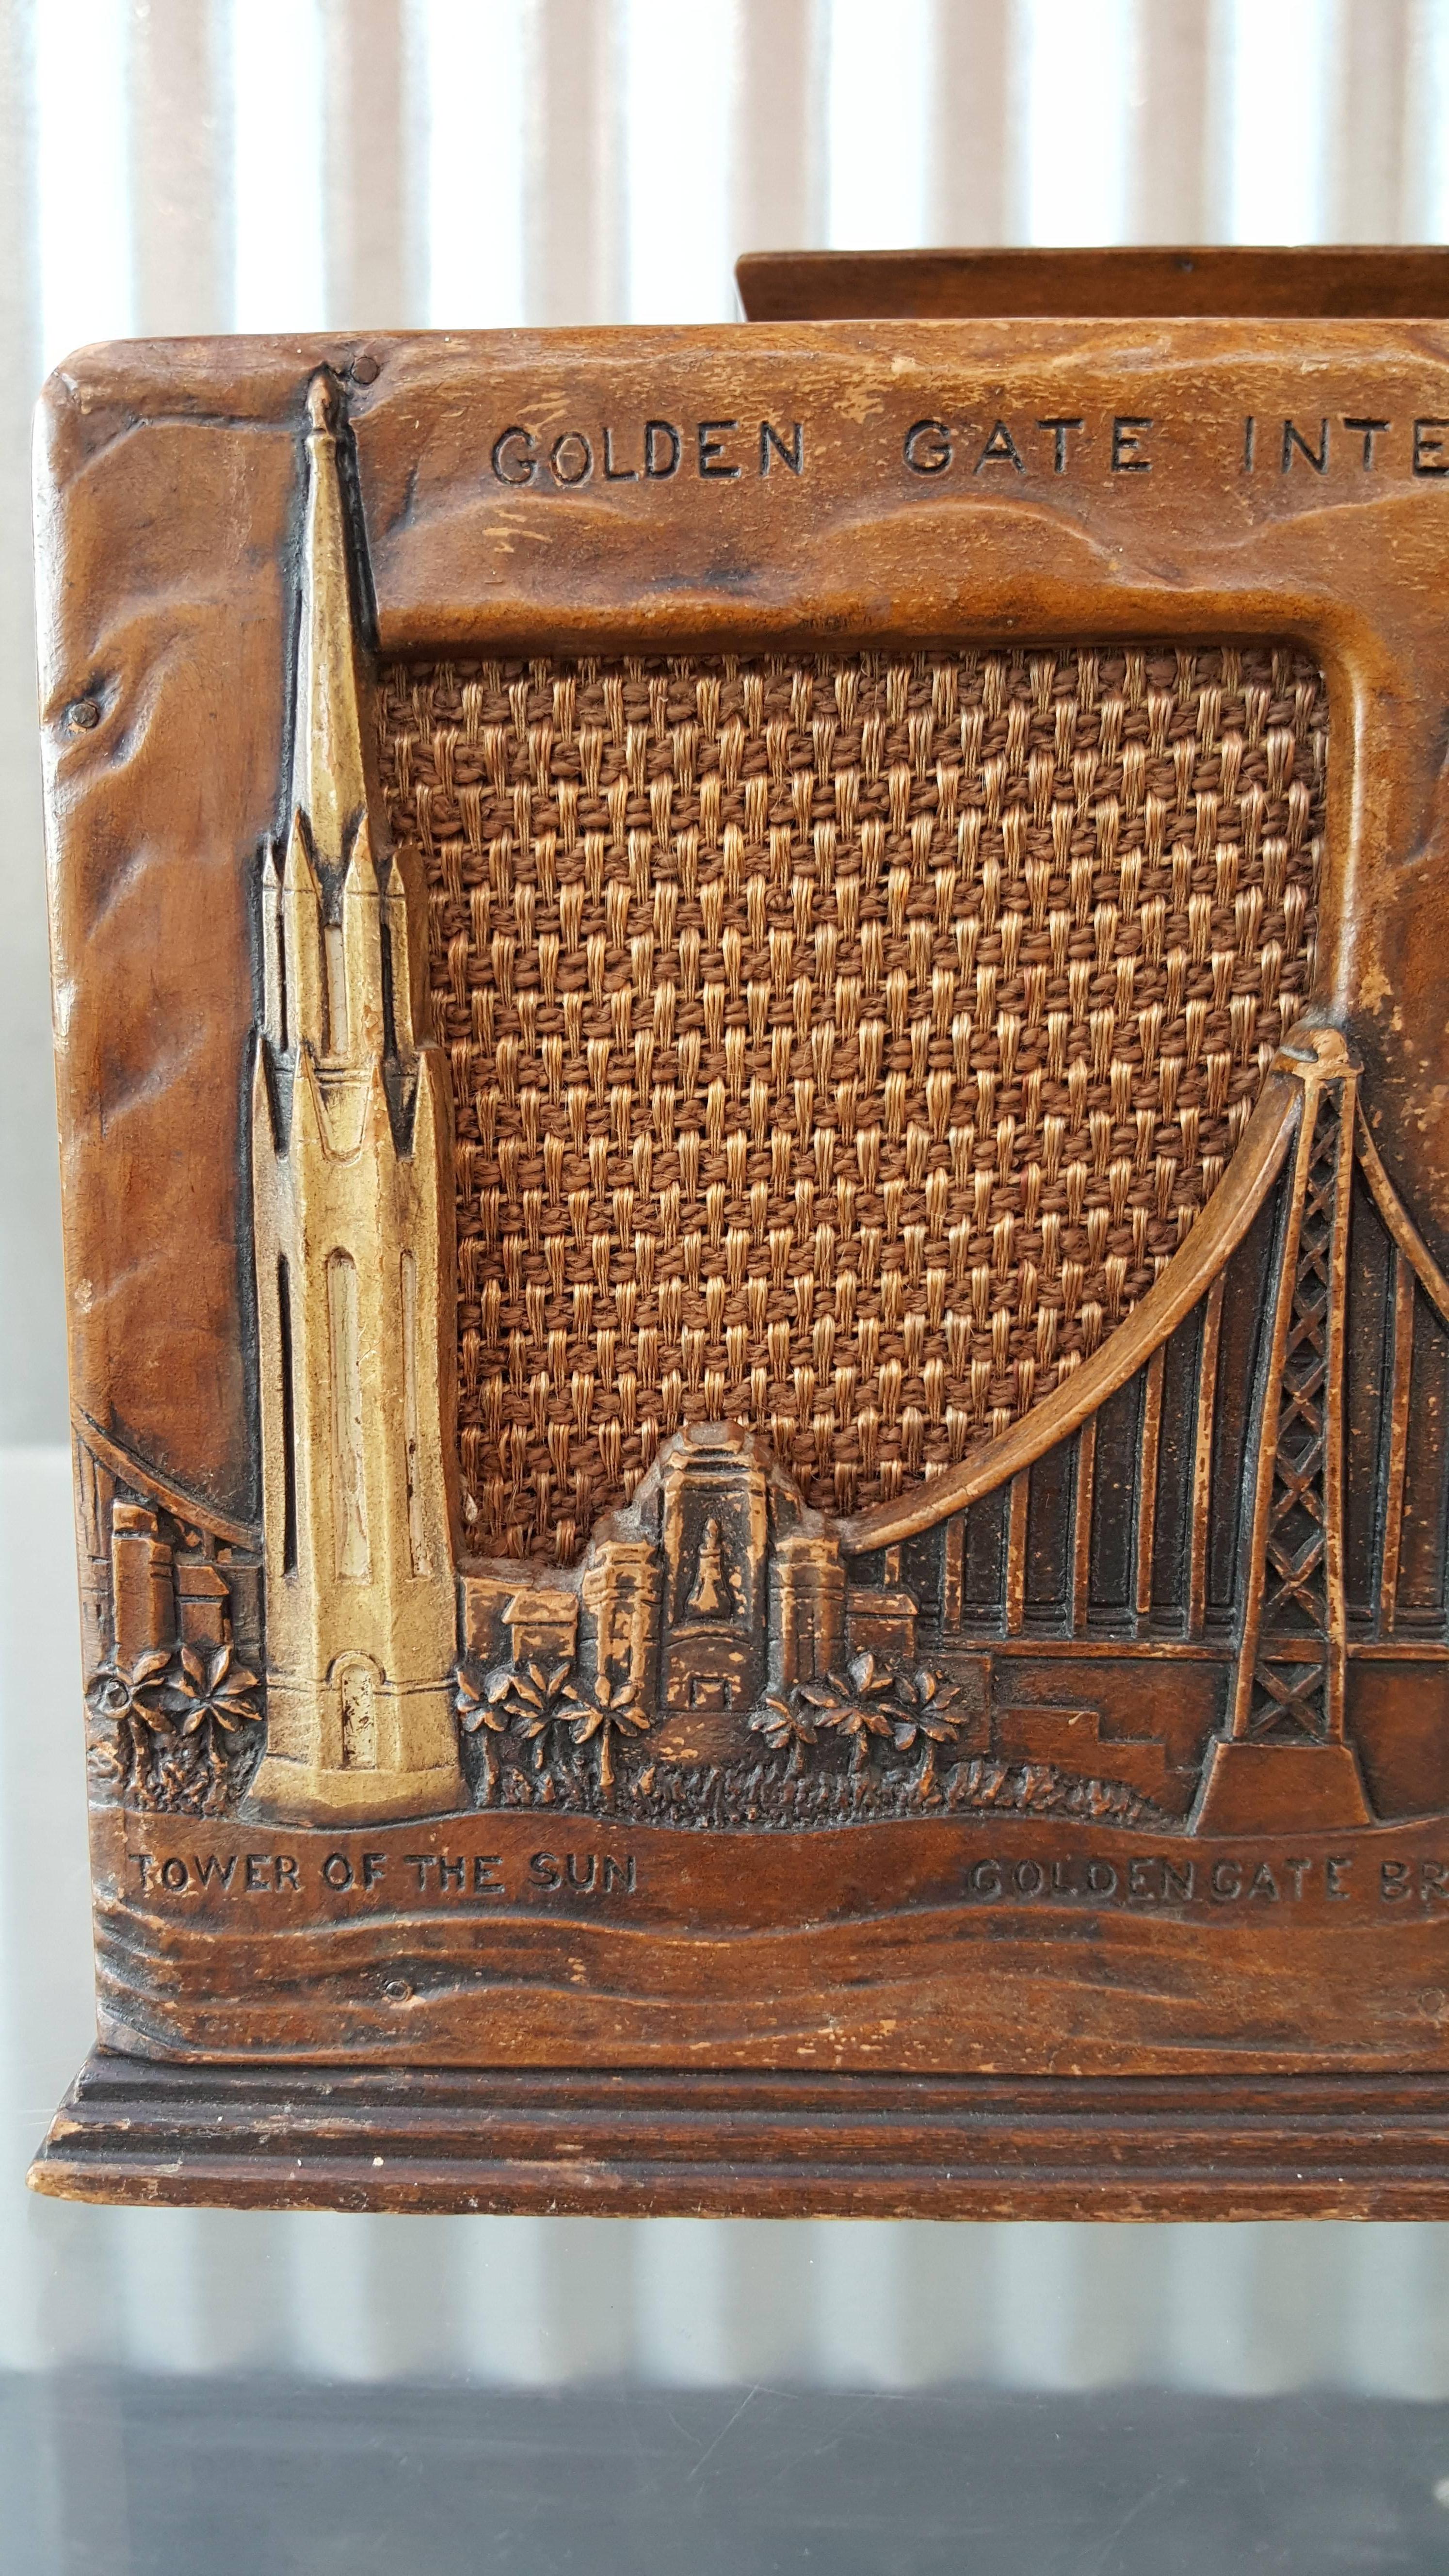 Very rare memorabilia from the 1939 San Francisco Golden Gate International Exposition. An RCA Victor vacuum tube Am radio, Model 40X56, circa 1939. Wood construction with a molded syroco wood front depicting the Golden Gate Bridge, Tower of the Sun